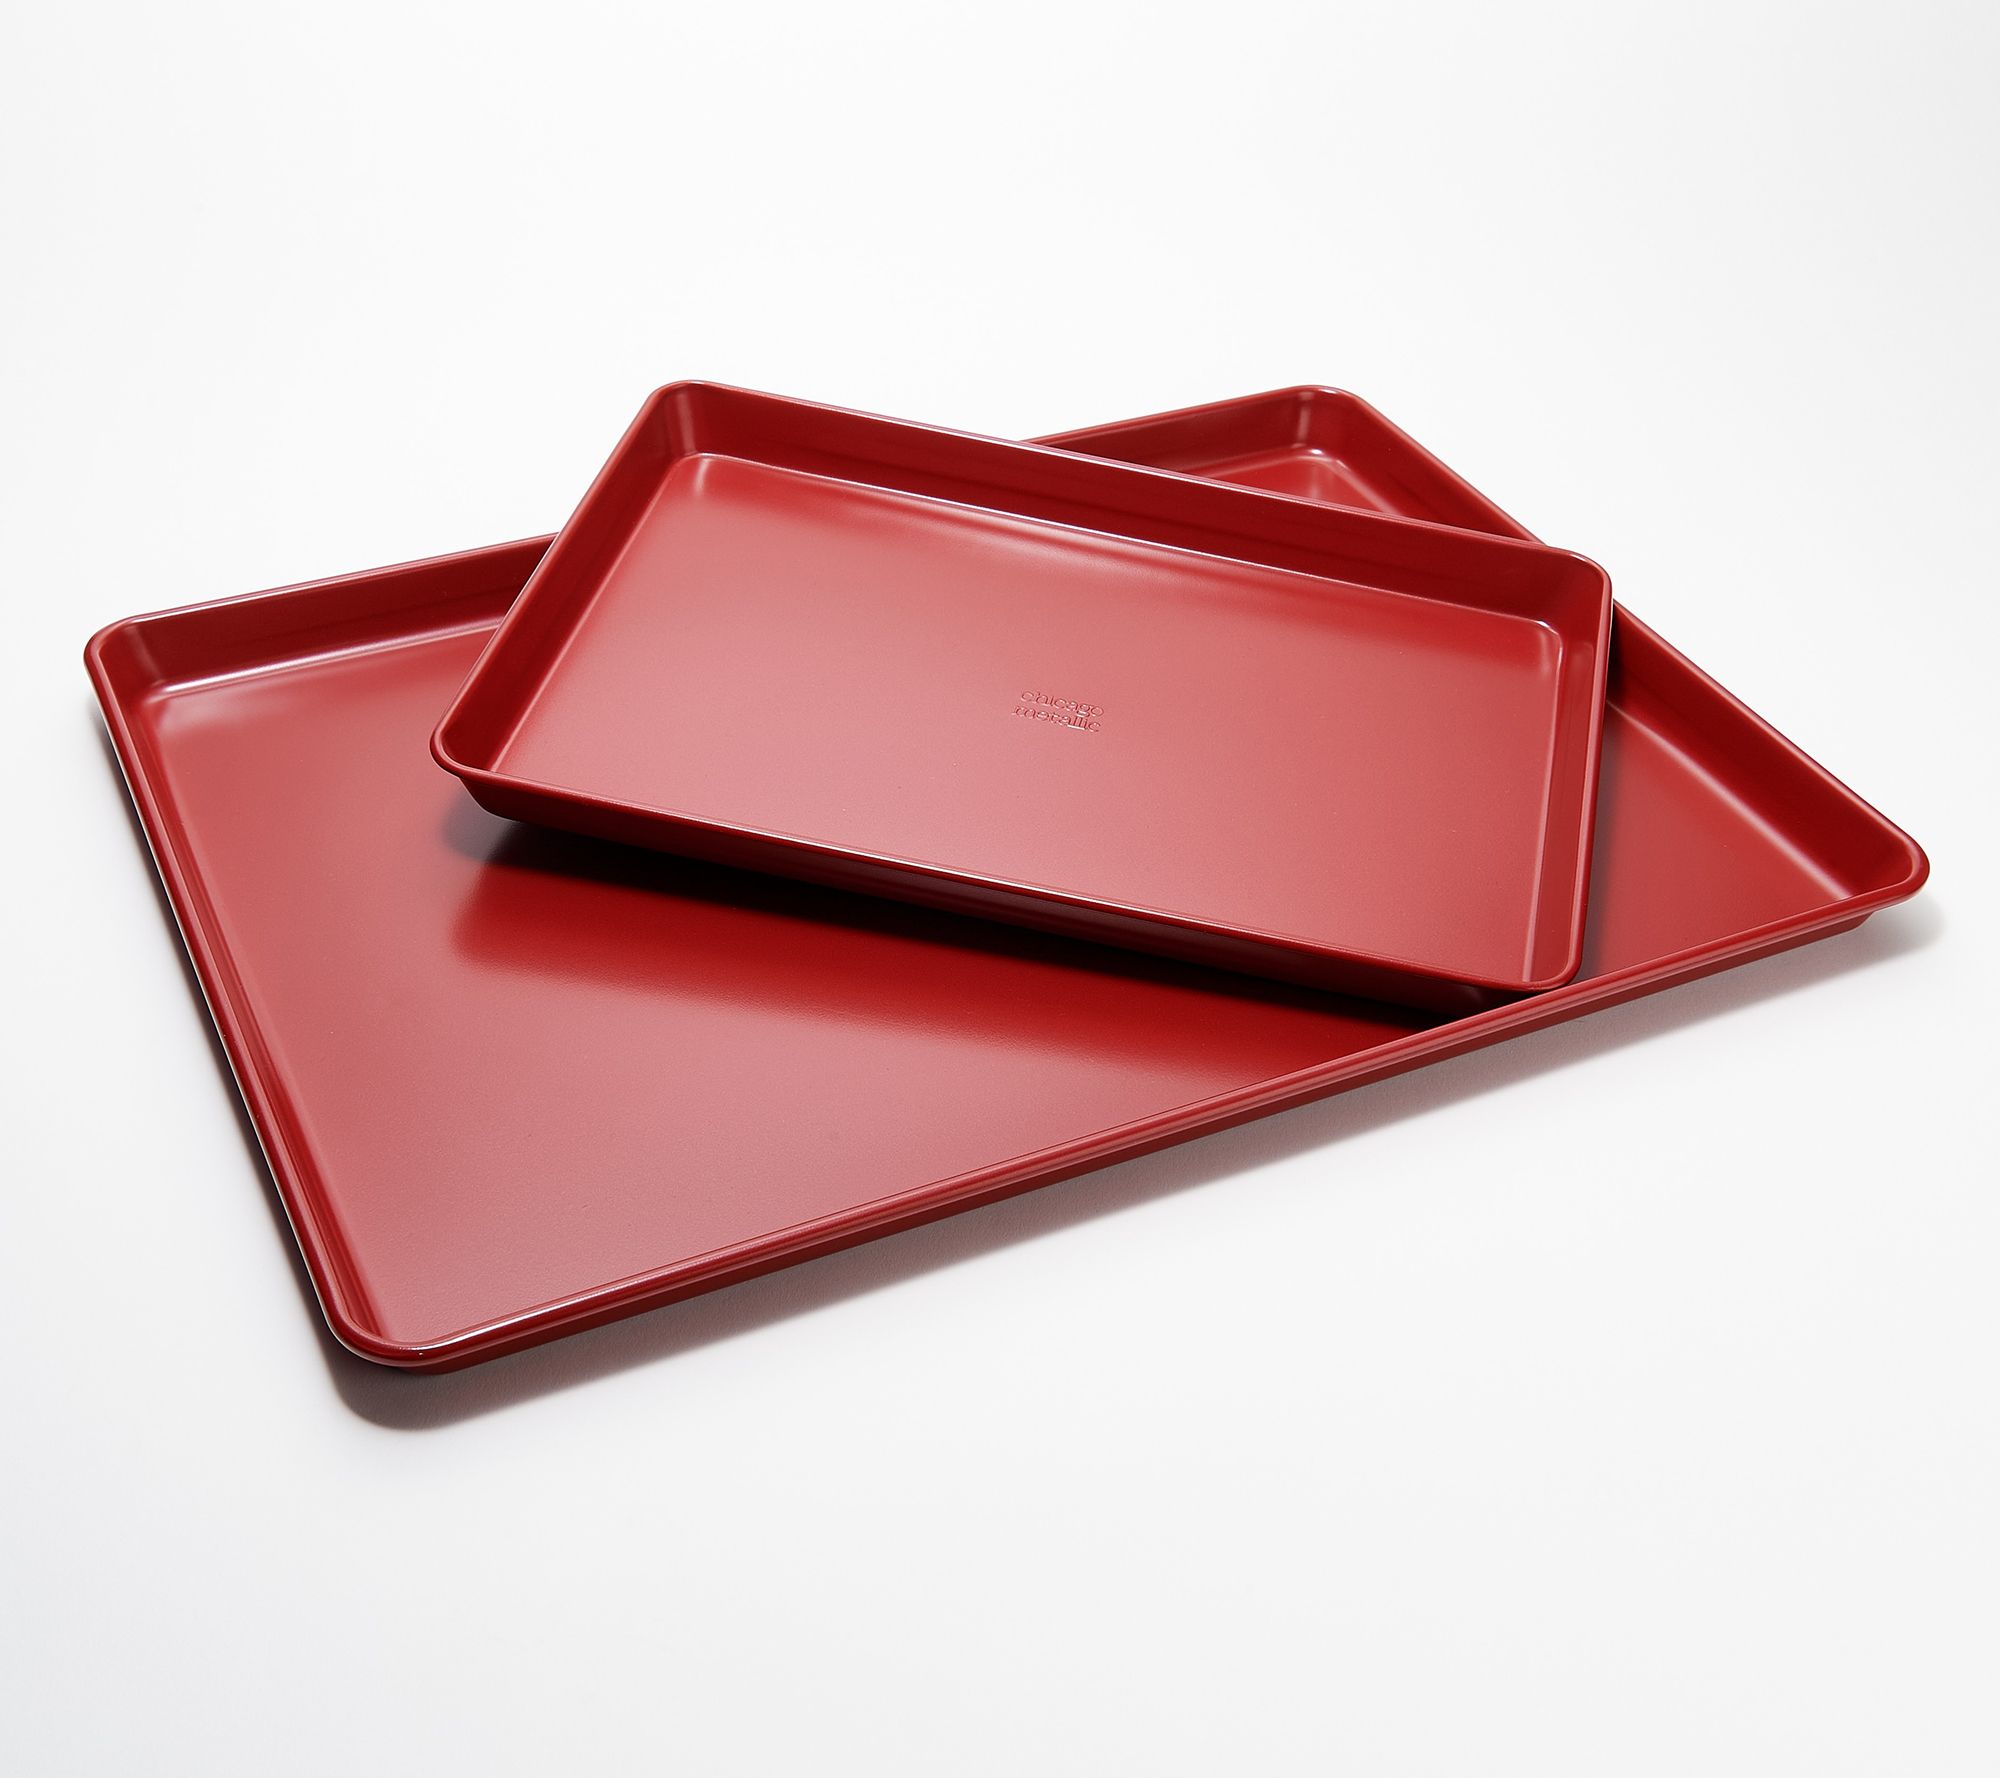 Chicago Metallic Set of 2 Colored Baking Sheets 